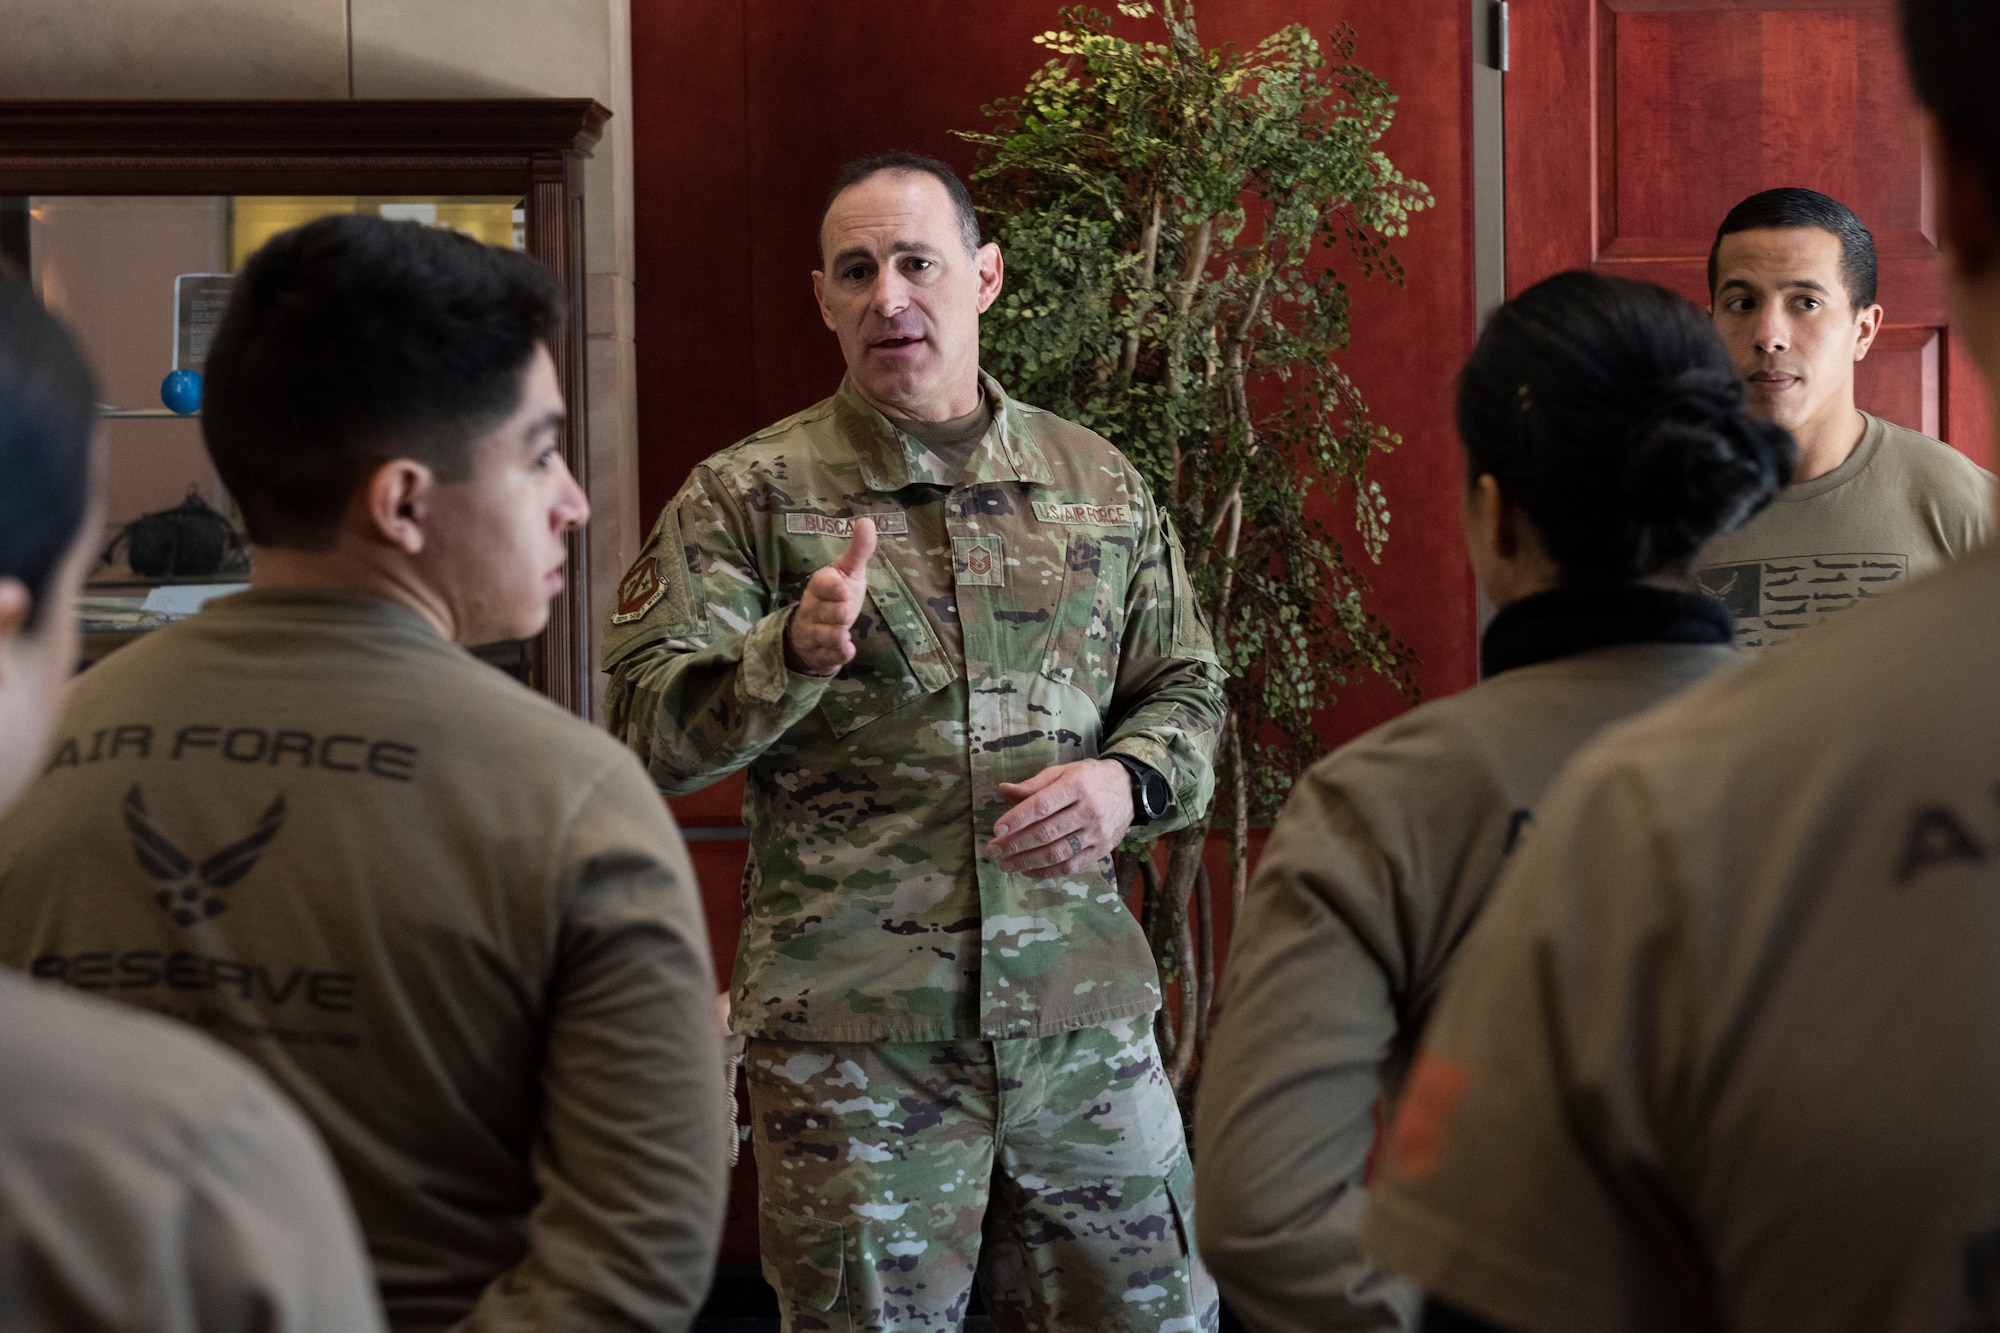 A senior enlisted member speaks to a group.